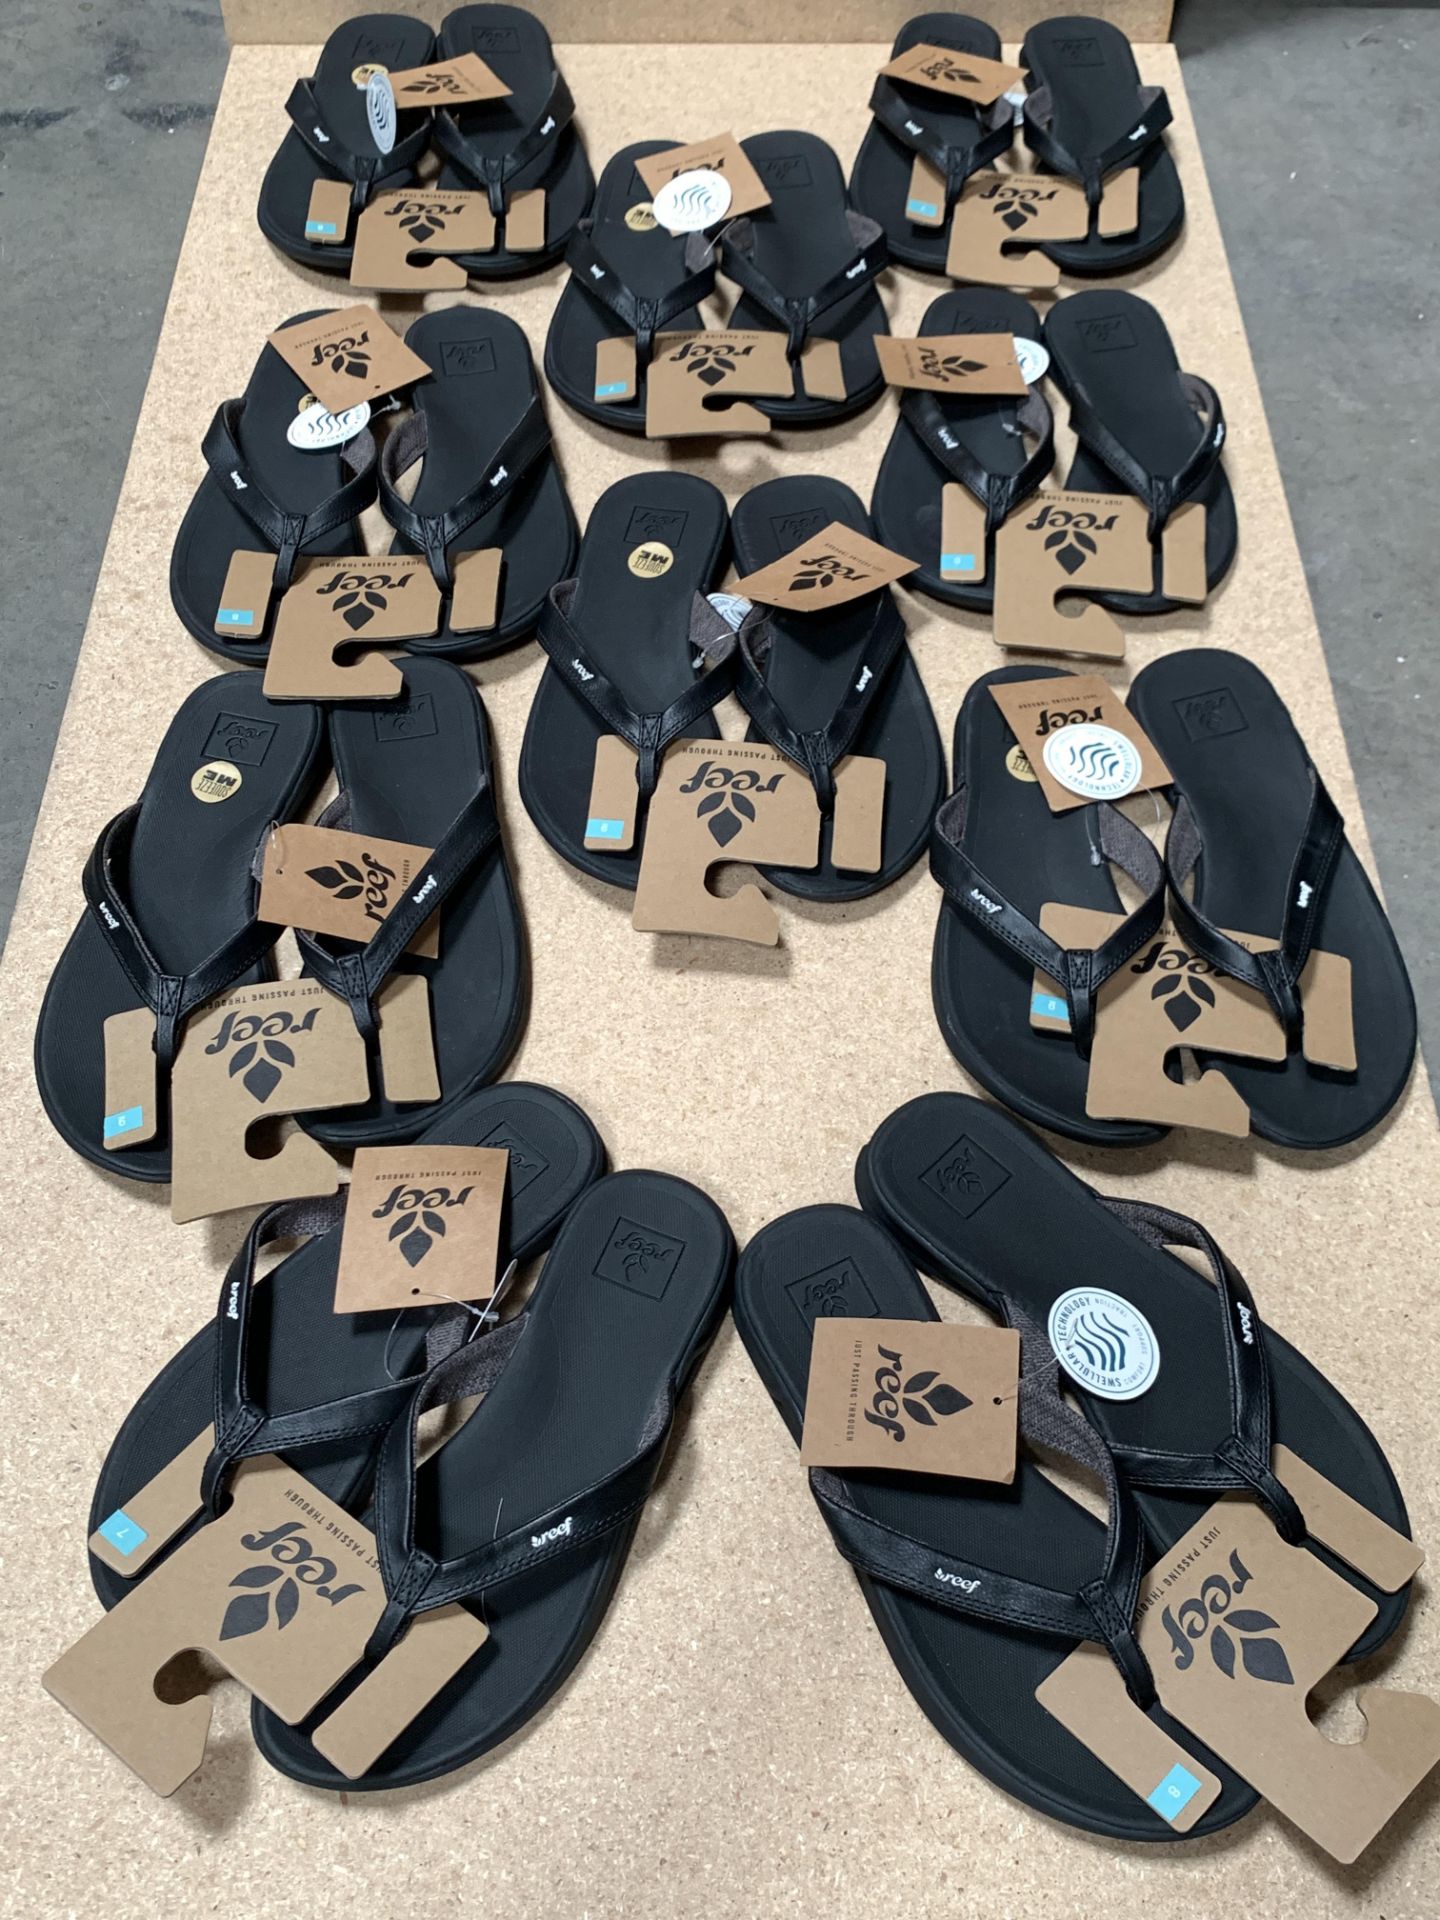 10 REEF Flip Flop Sandals, New w. Tags, Various Sizes, Rover Catch Black (Retail Value $550) - Image 2 of 5